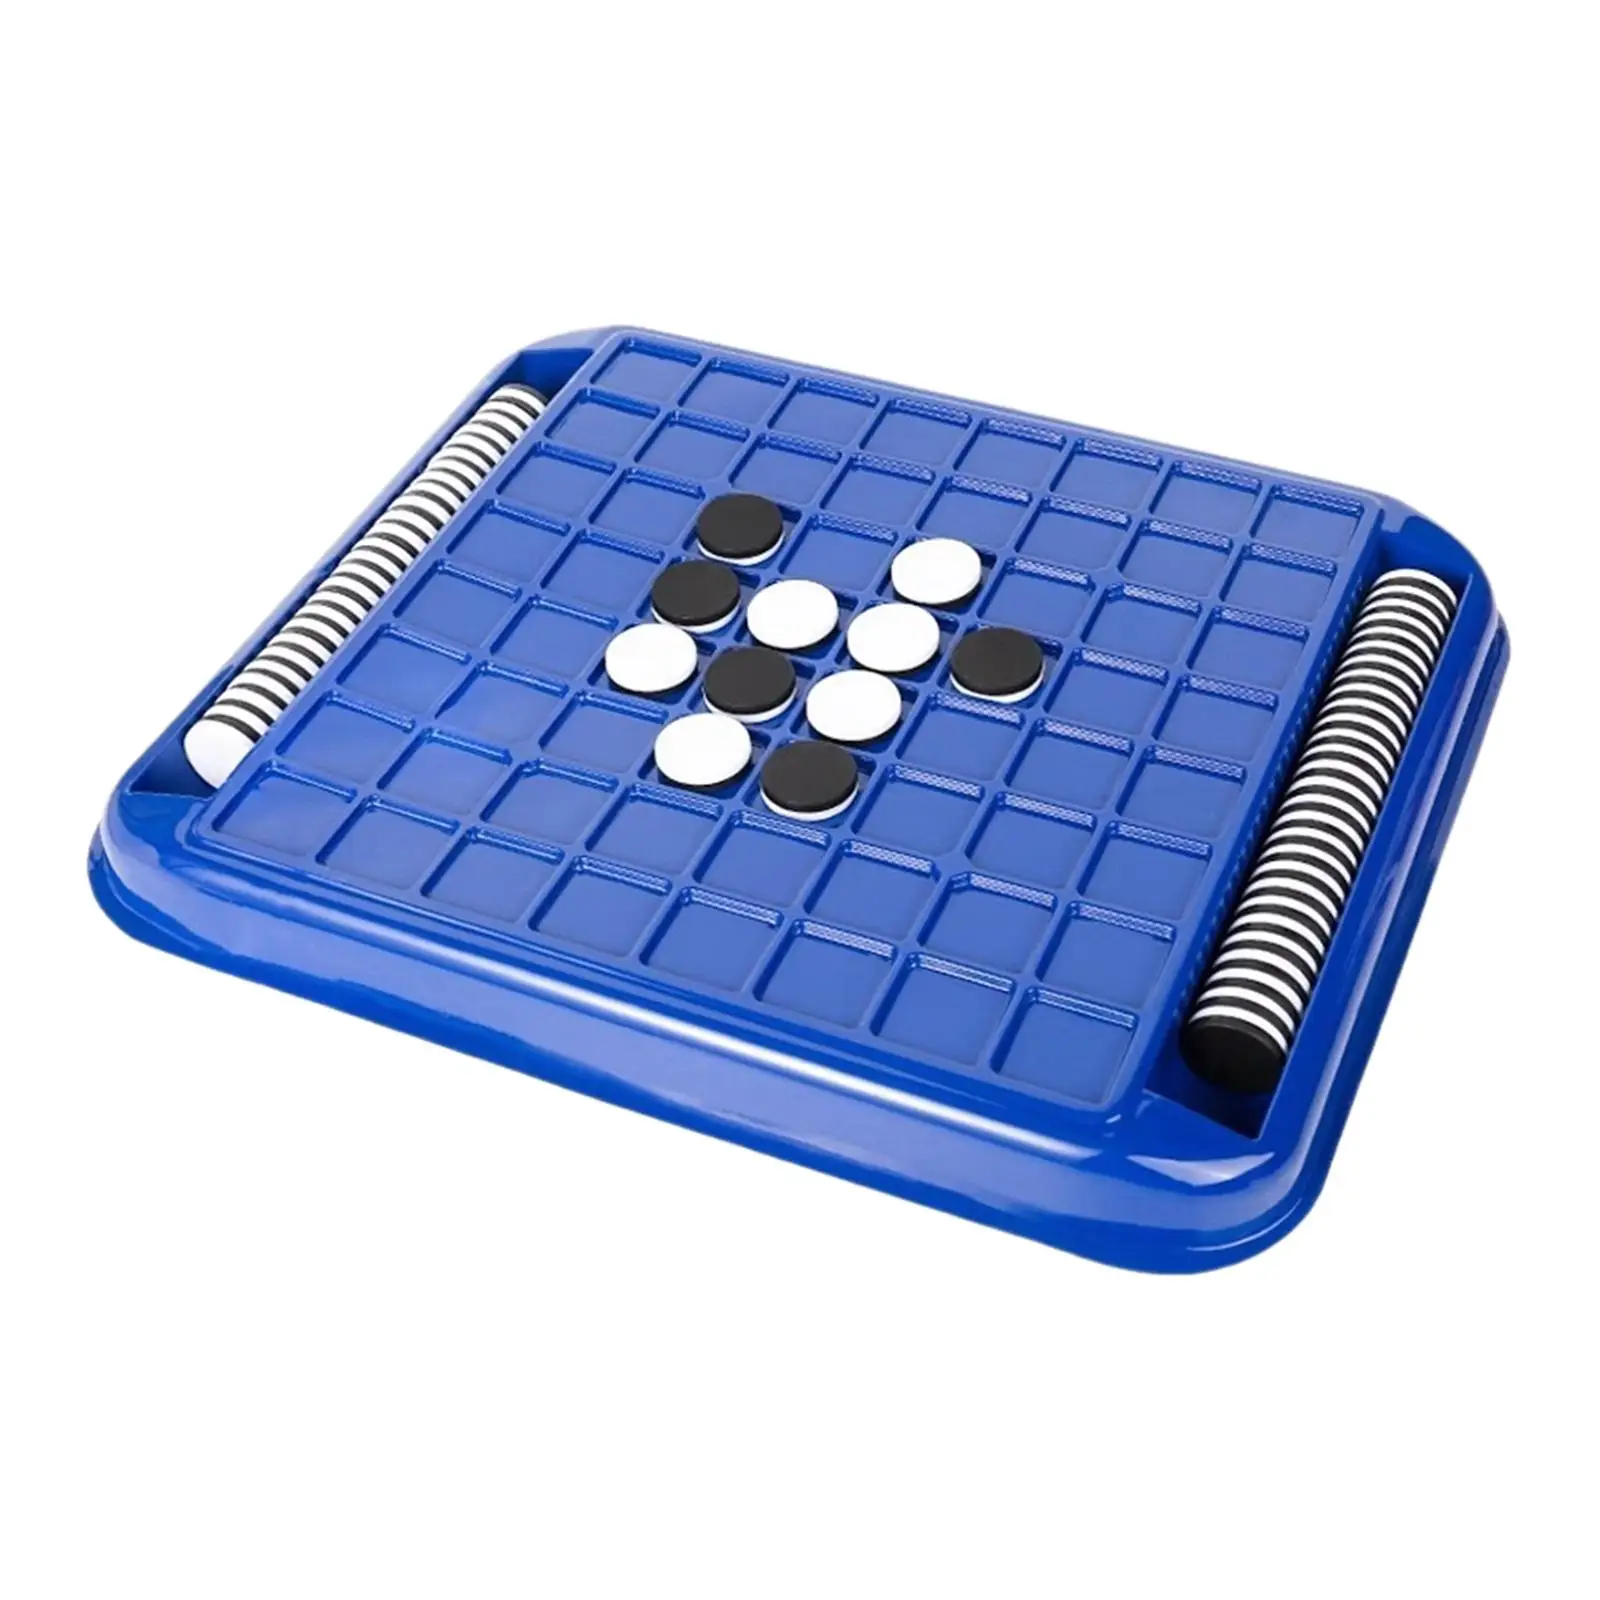 Strategy Board Game Parties Family Game 37cmx31cm Tabletop Game Classic Reversi Strategy Board Game for Family Teens Kids Home